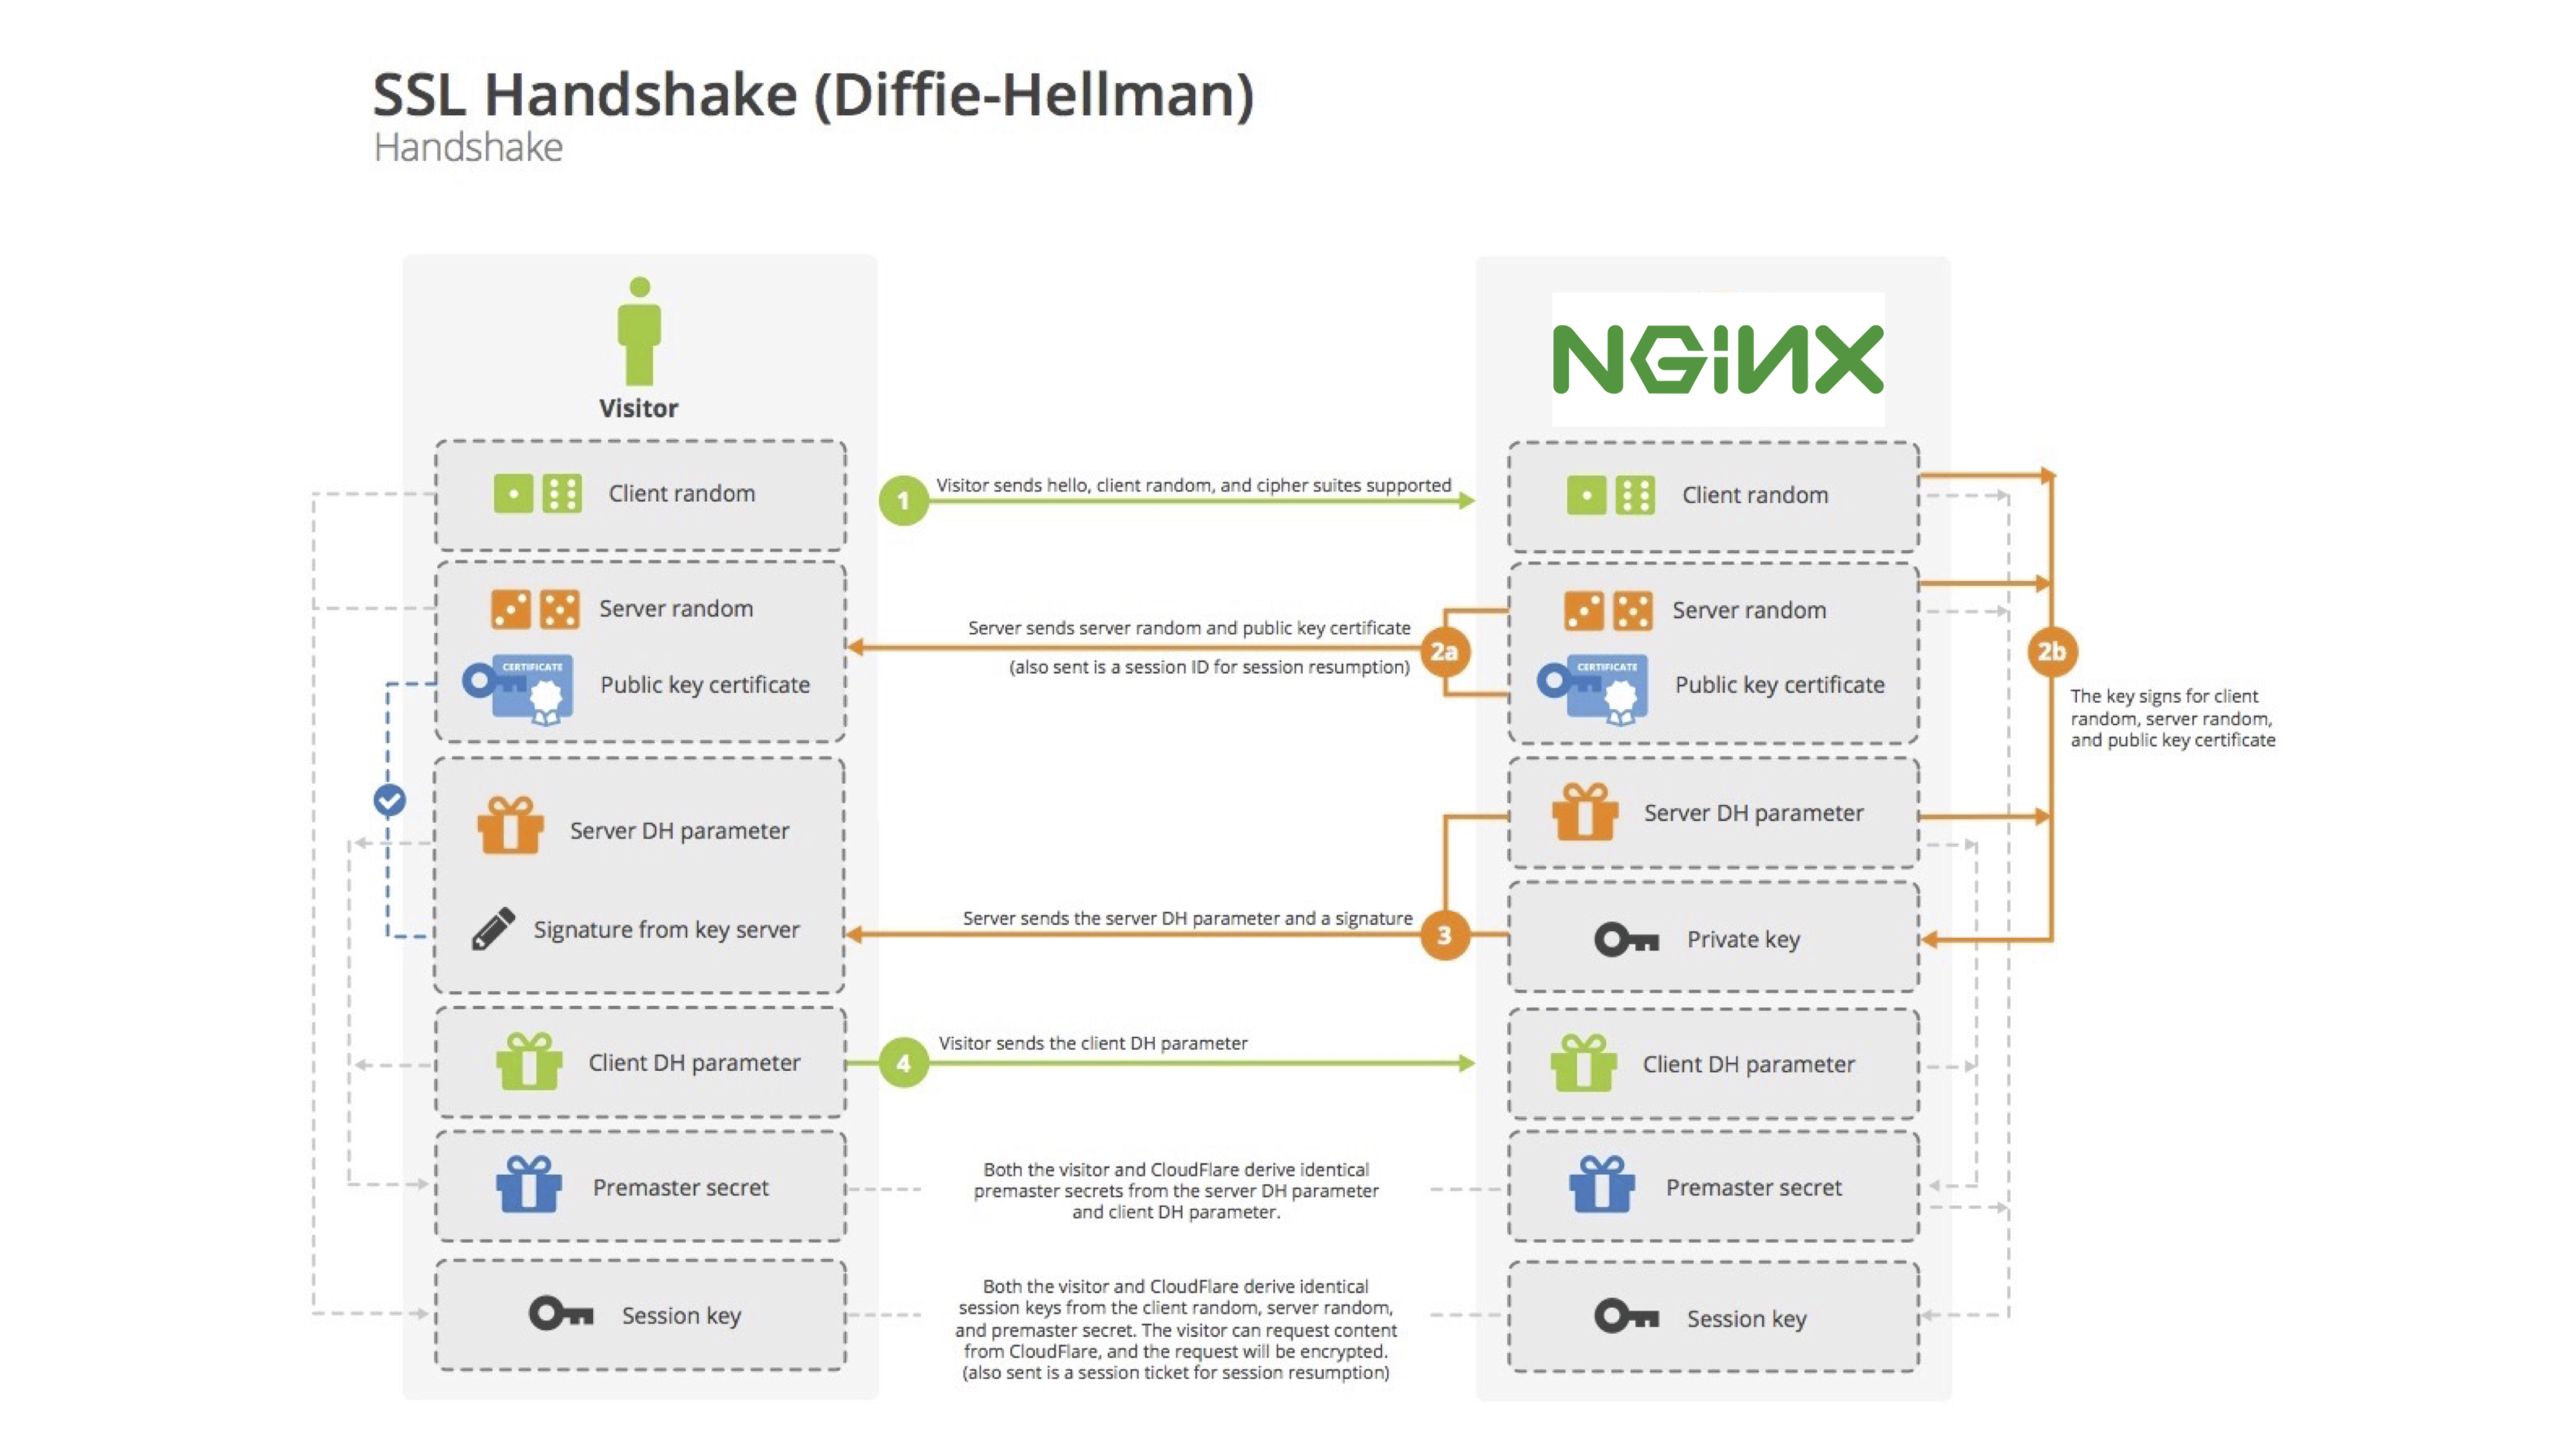 To establish secured communication, the visitor to a website and NGINX perform an SSL handshake, with details shown here for Diffie‑Hellman encryption [presentation by Nick Sullivan of CloudFlare at nginx.conf 2015]